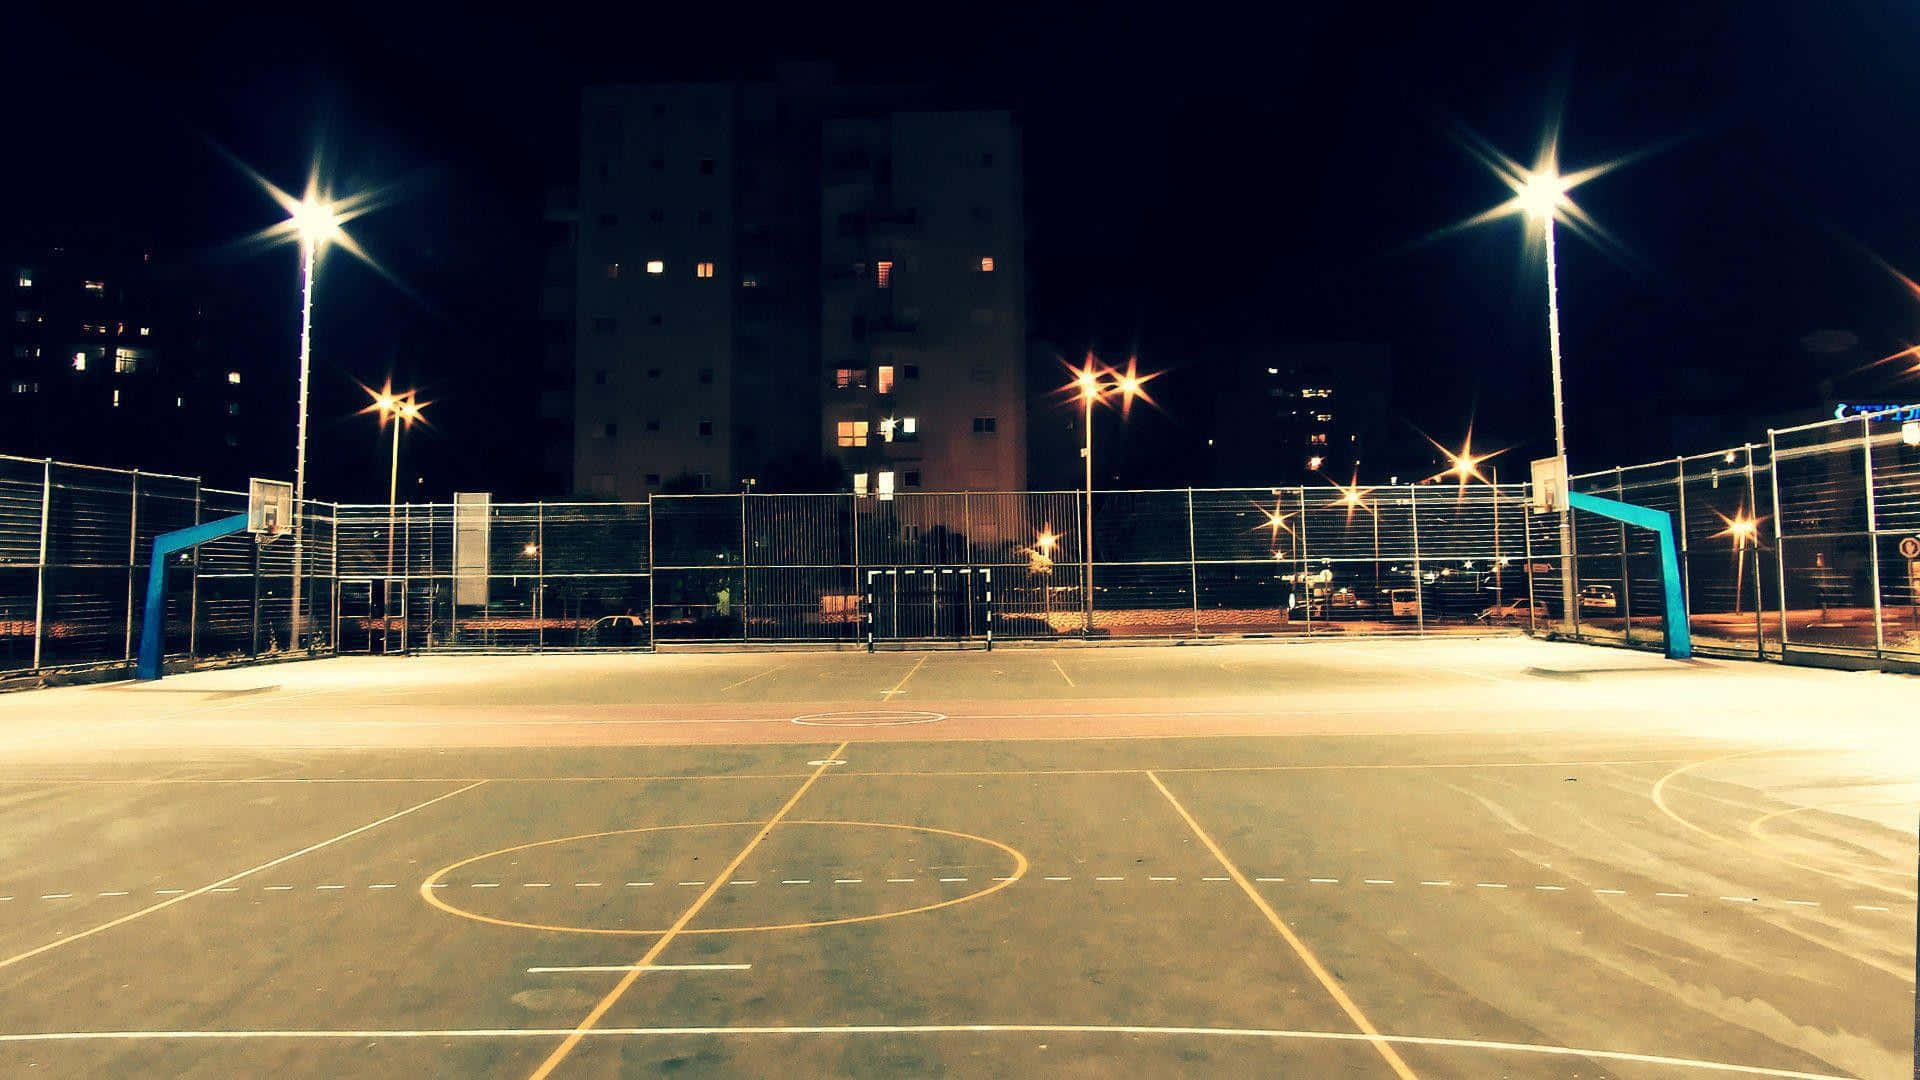 A Basketball Court At Night